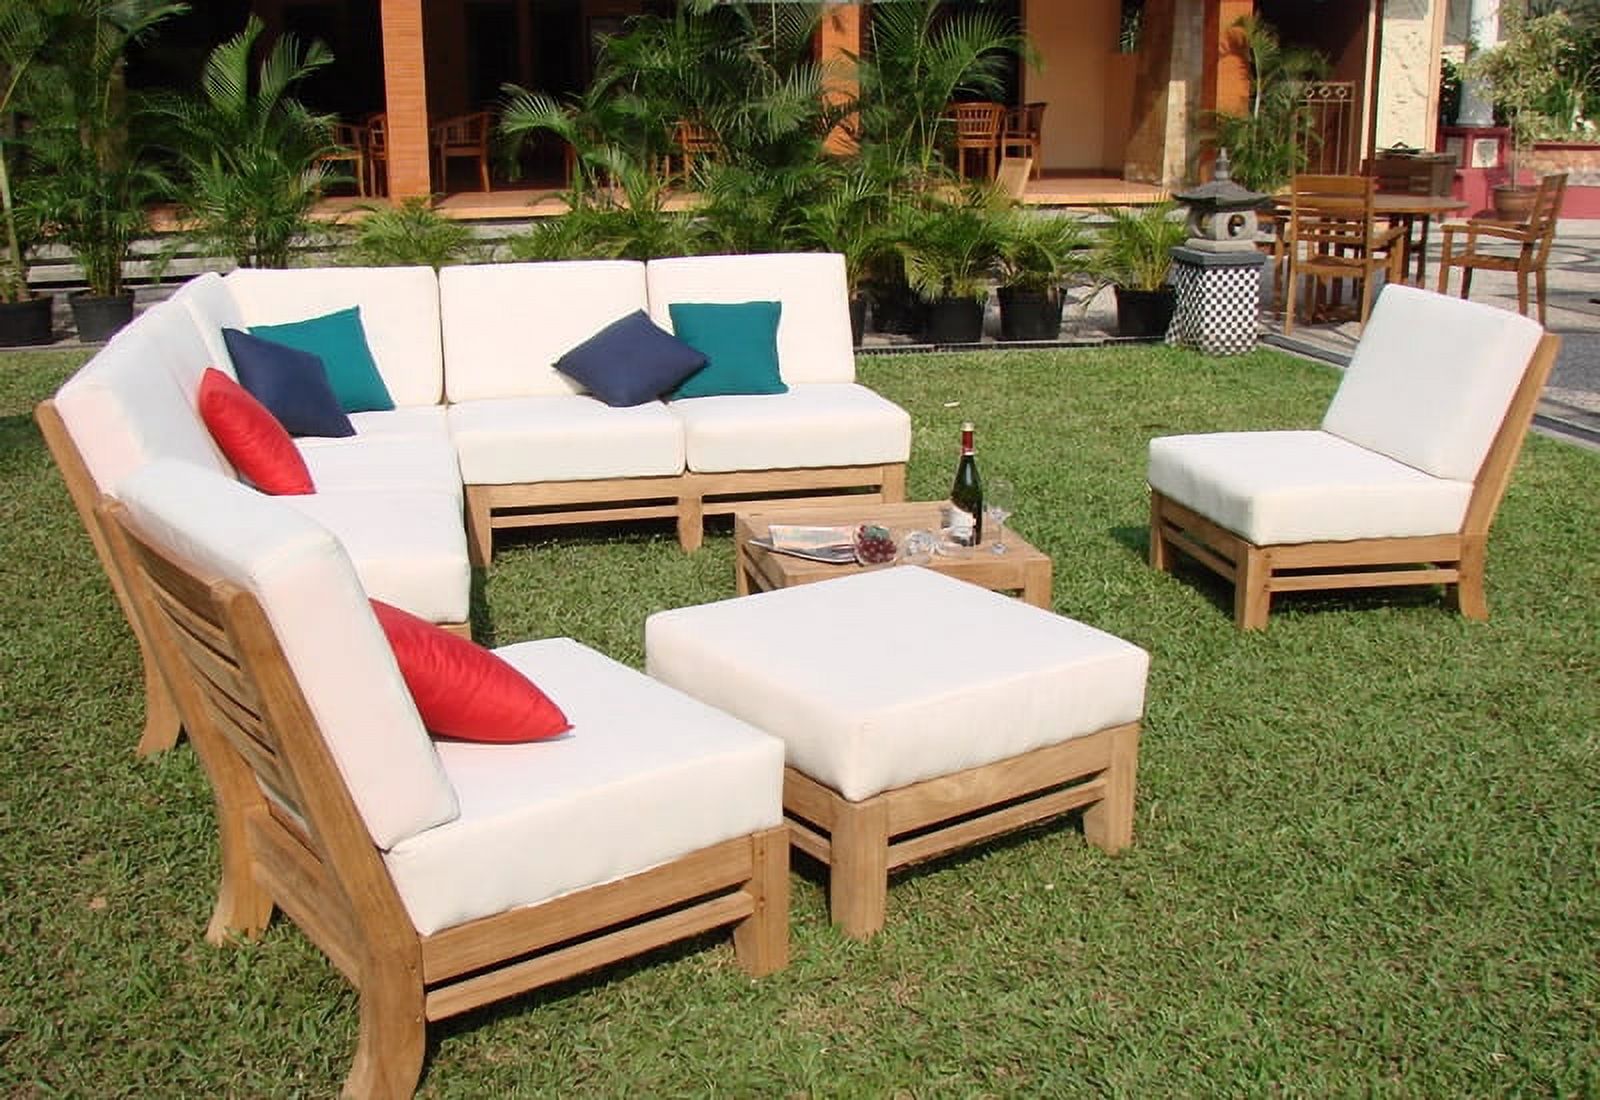 WholesaleTeak Outdoor Patio Grade-A Teak Wood 7 Piece Teak Sectional Sofa Set - 2 Love Seats, 2 Lounge Chair, 1 Corner Pc, 1 Ottoman & 1 Side Table - Furniture only -- Ramled collection #WMSSRM1 - image 5 of 5